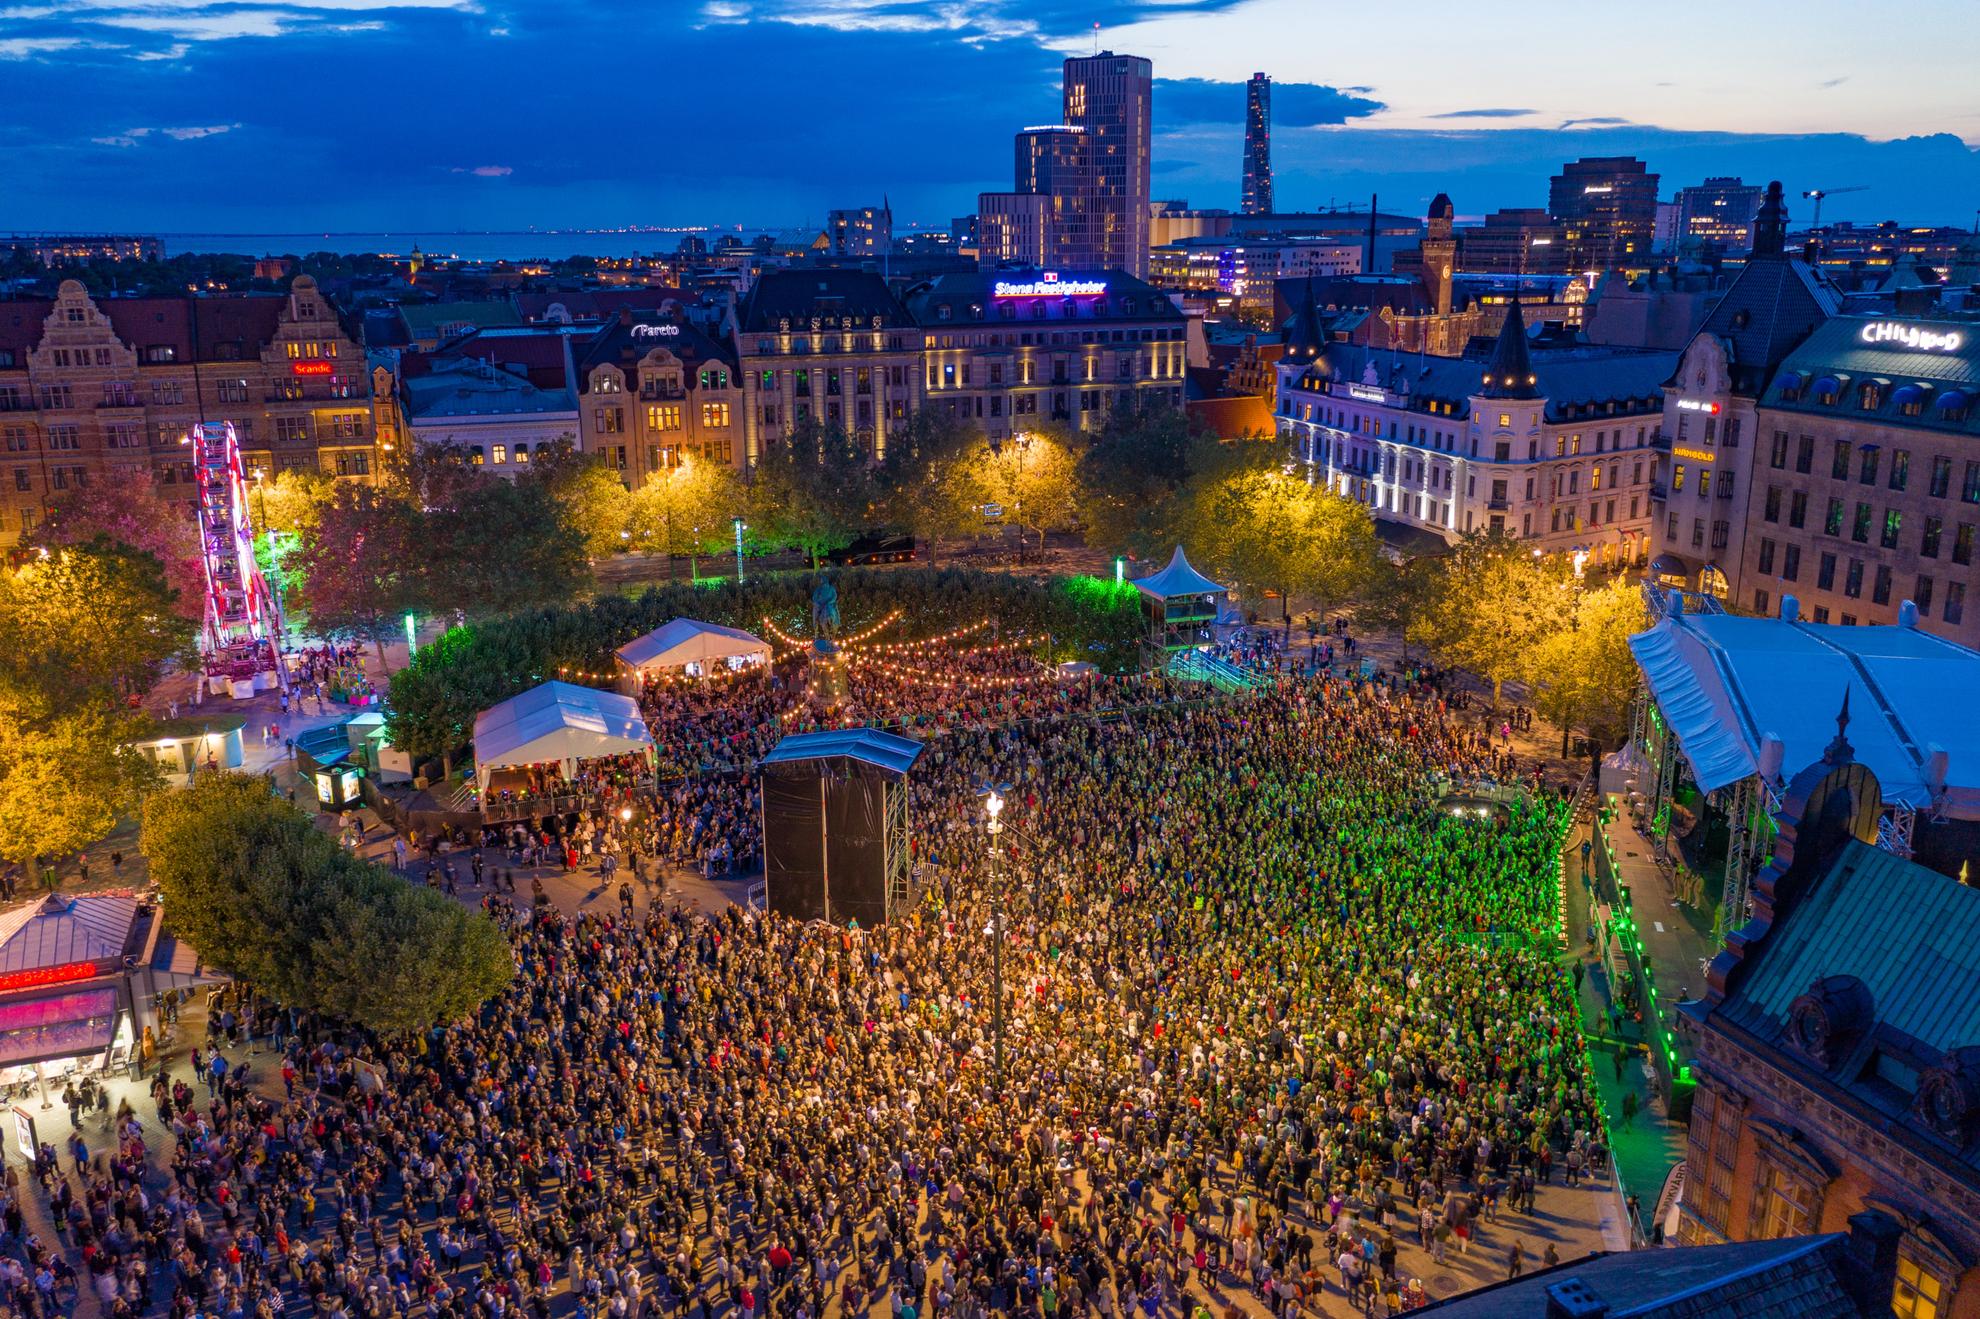 A drone image over the Malmö Festival in the evening, with thousands of visitors in front of a large stage.